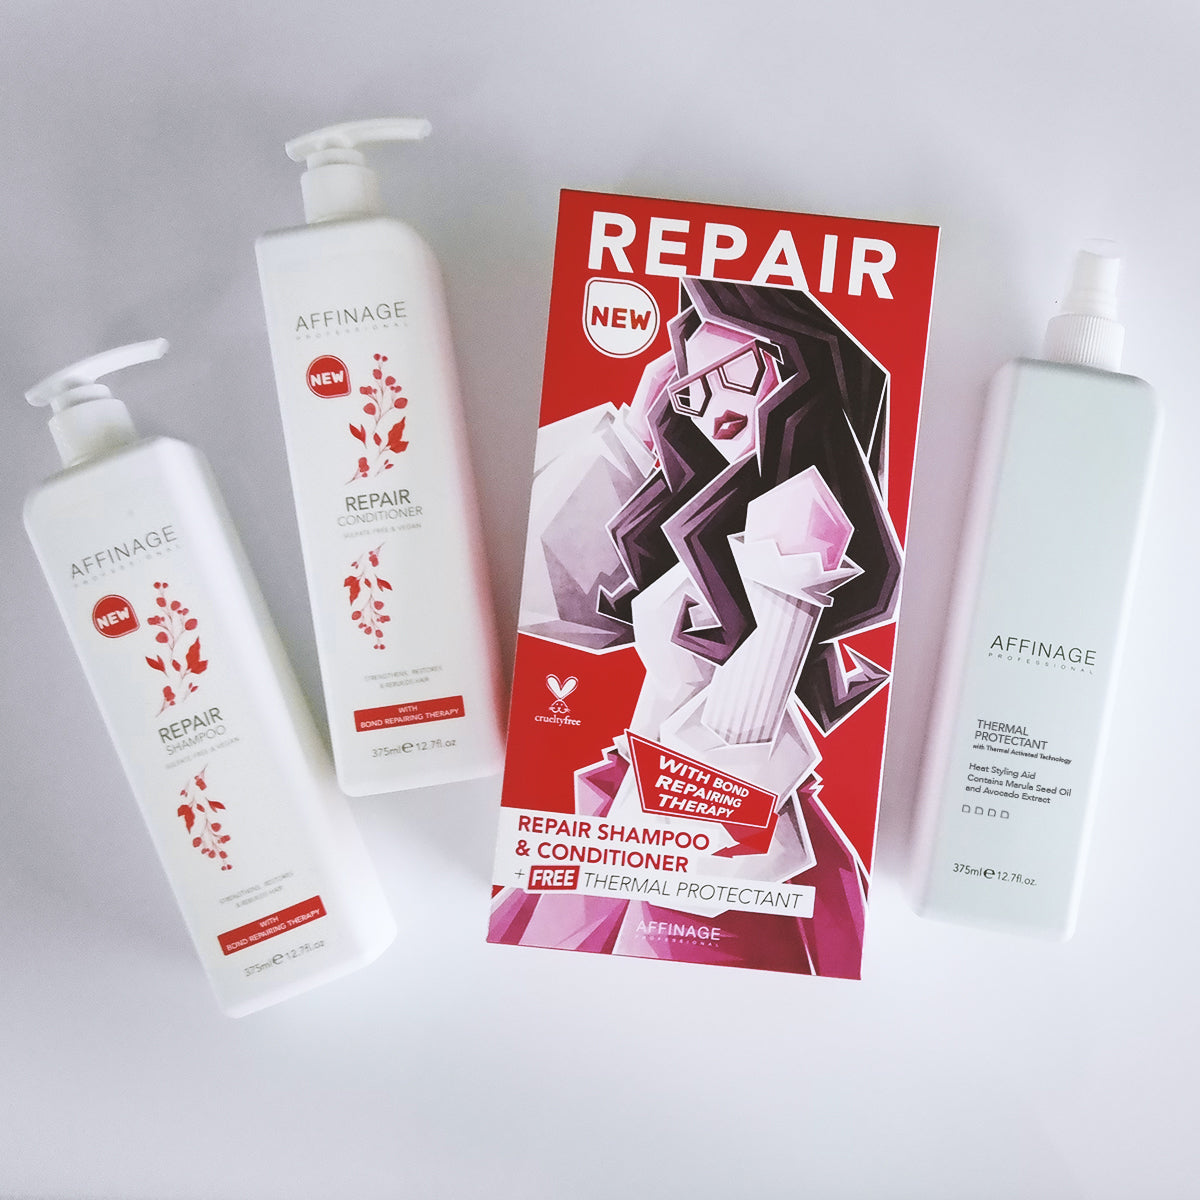 Affinage Repair Shampoo, Conditioner & Free Protectant 375ml